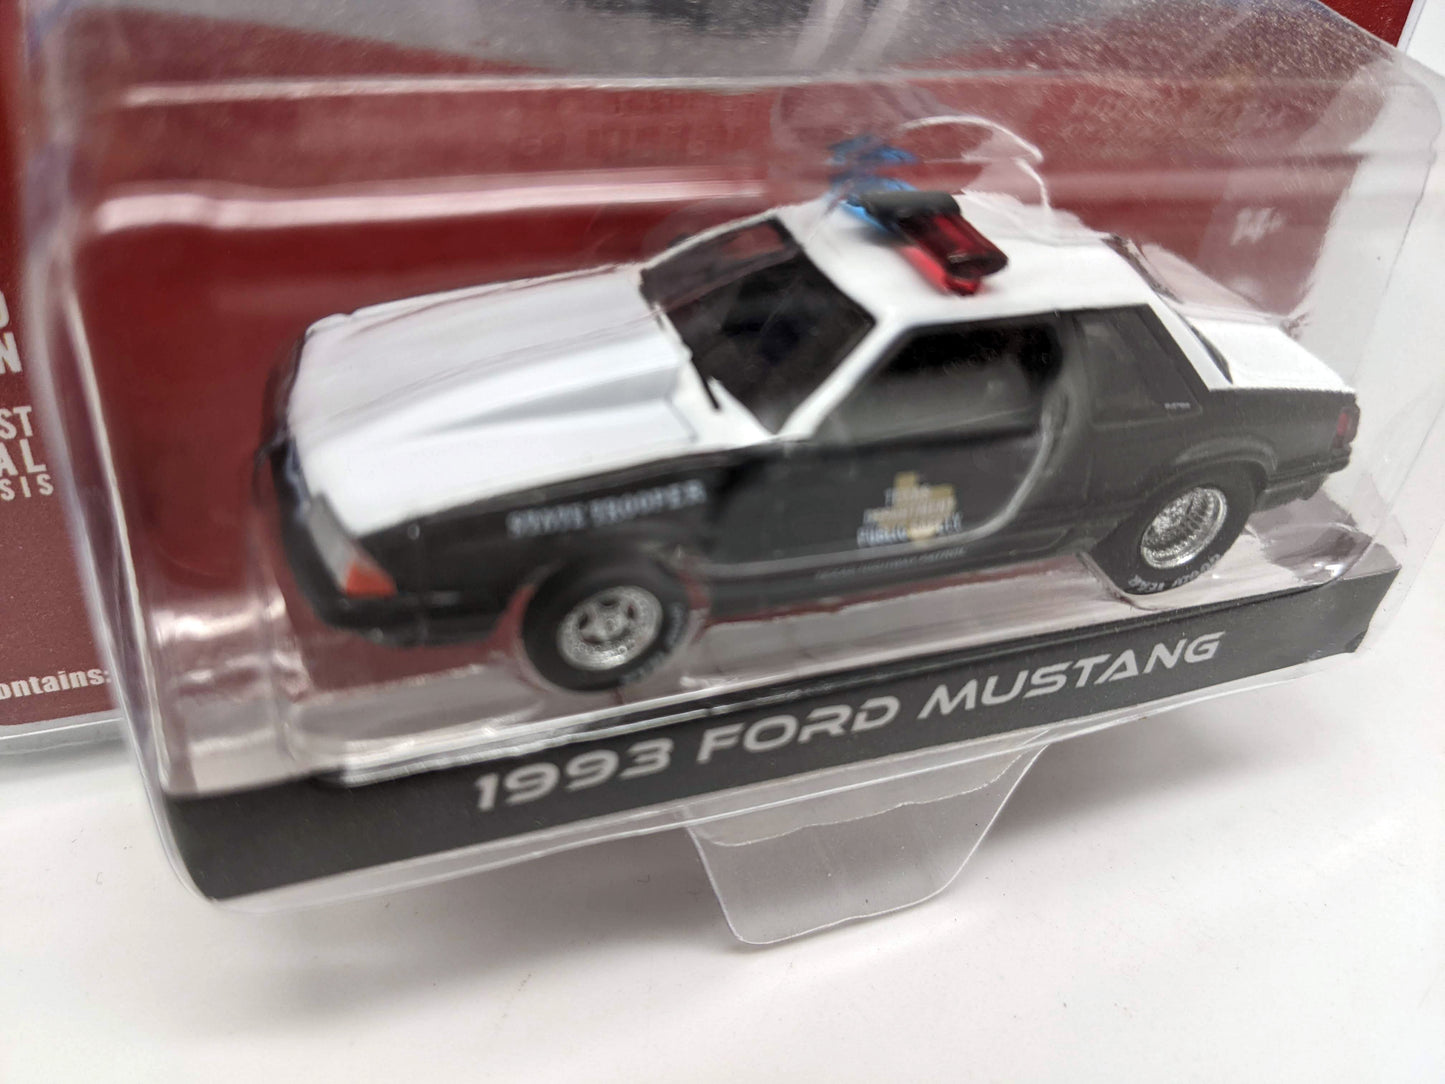 GL - 1993 Ford Mustang - Midnight Drags Texas Highway Patrol